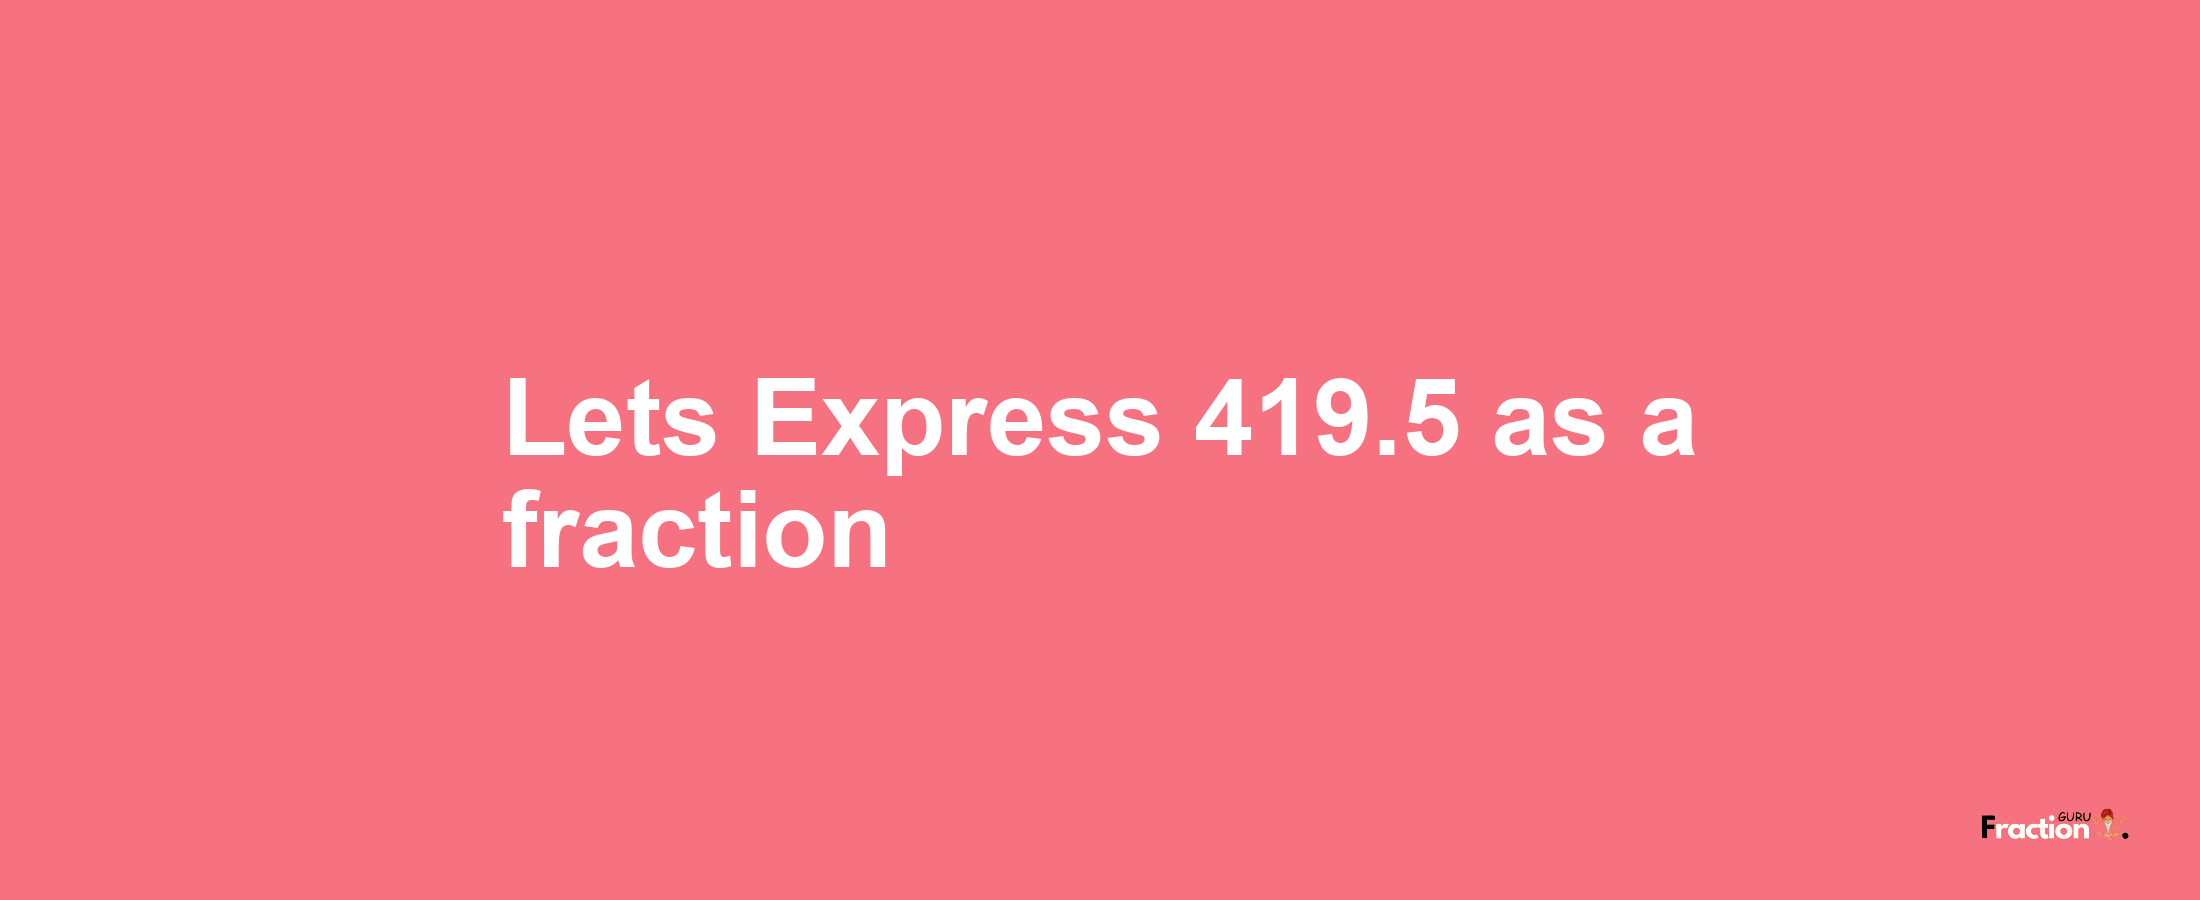 Lets Express 419.5 as afraction